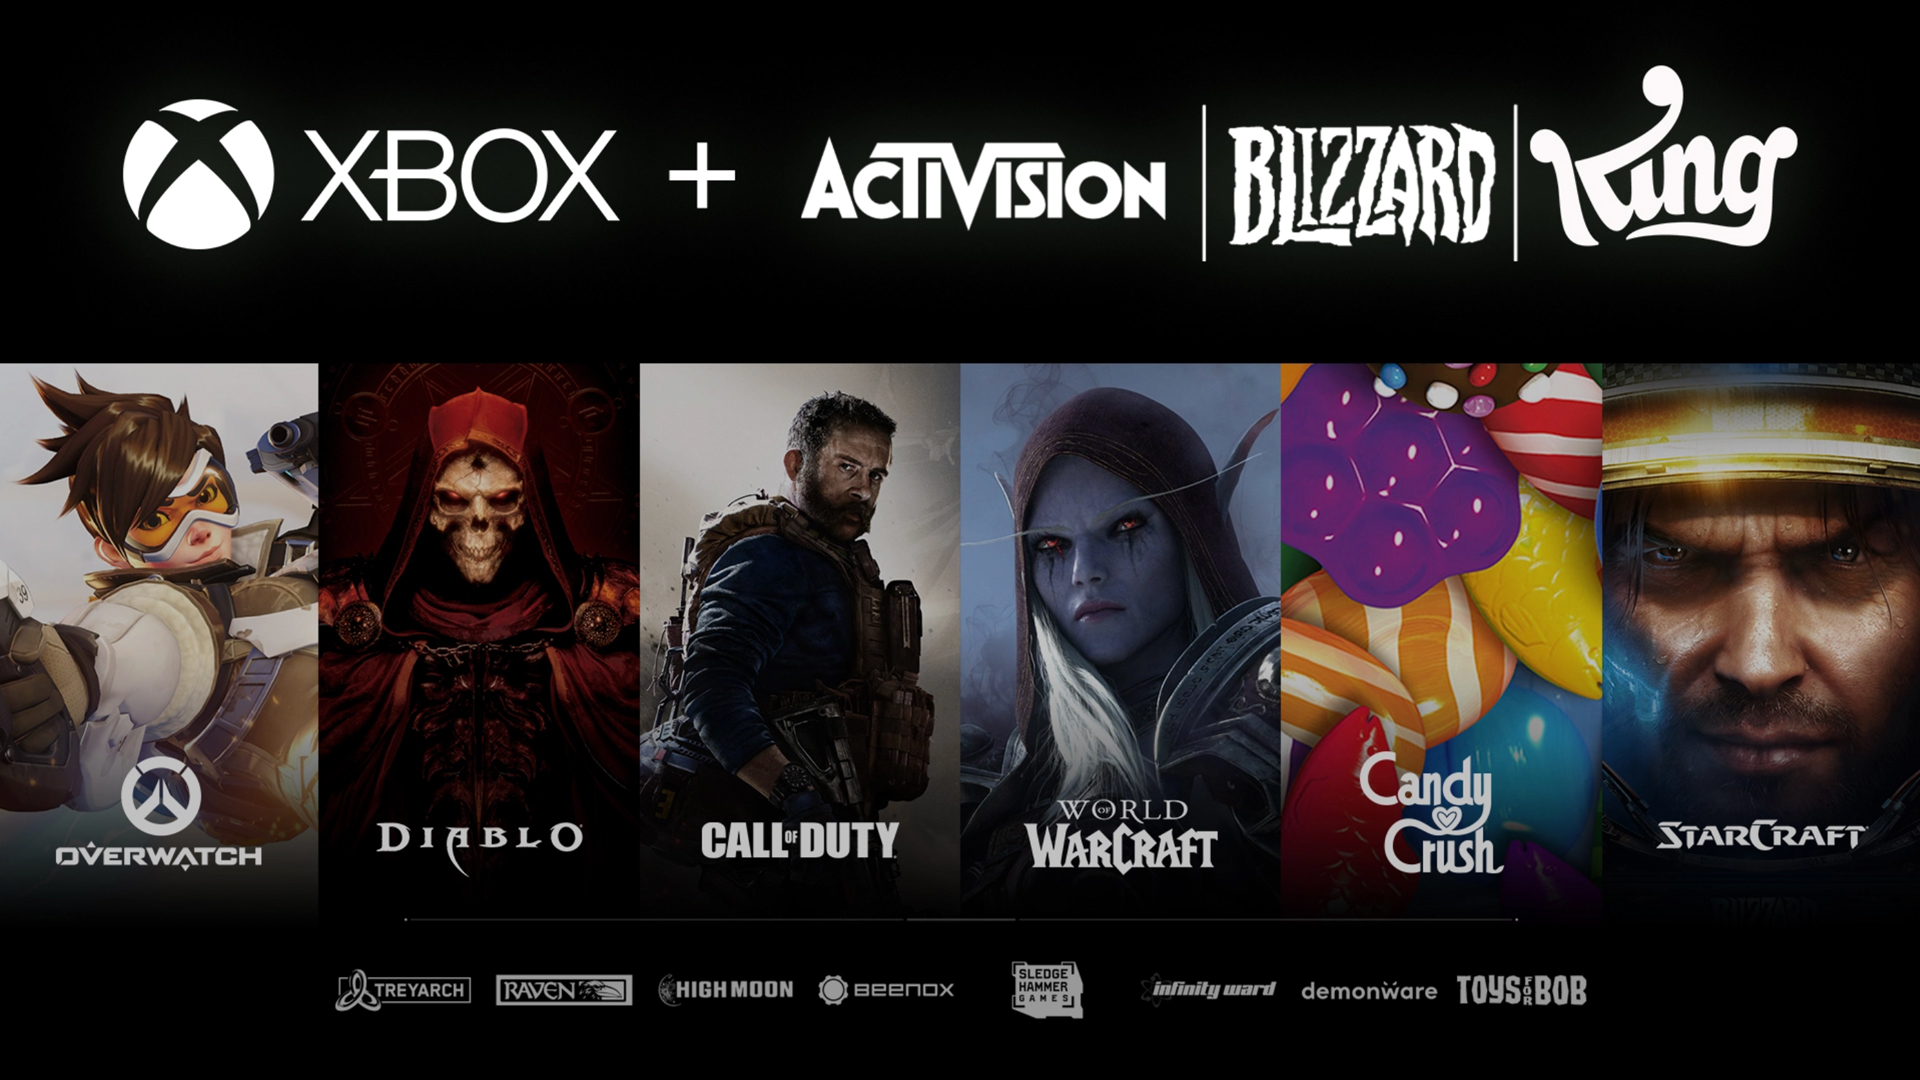 Every Xbox First Party Game Coming in 2020